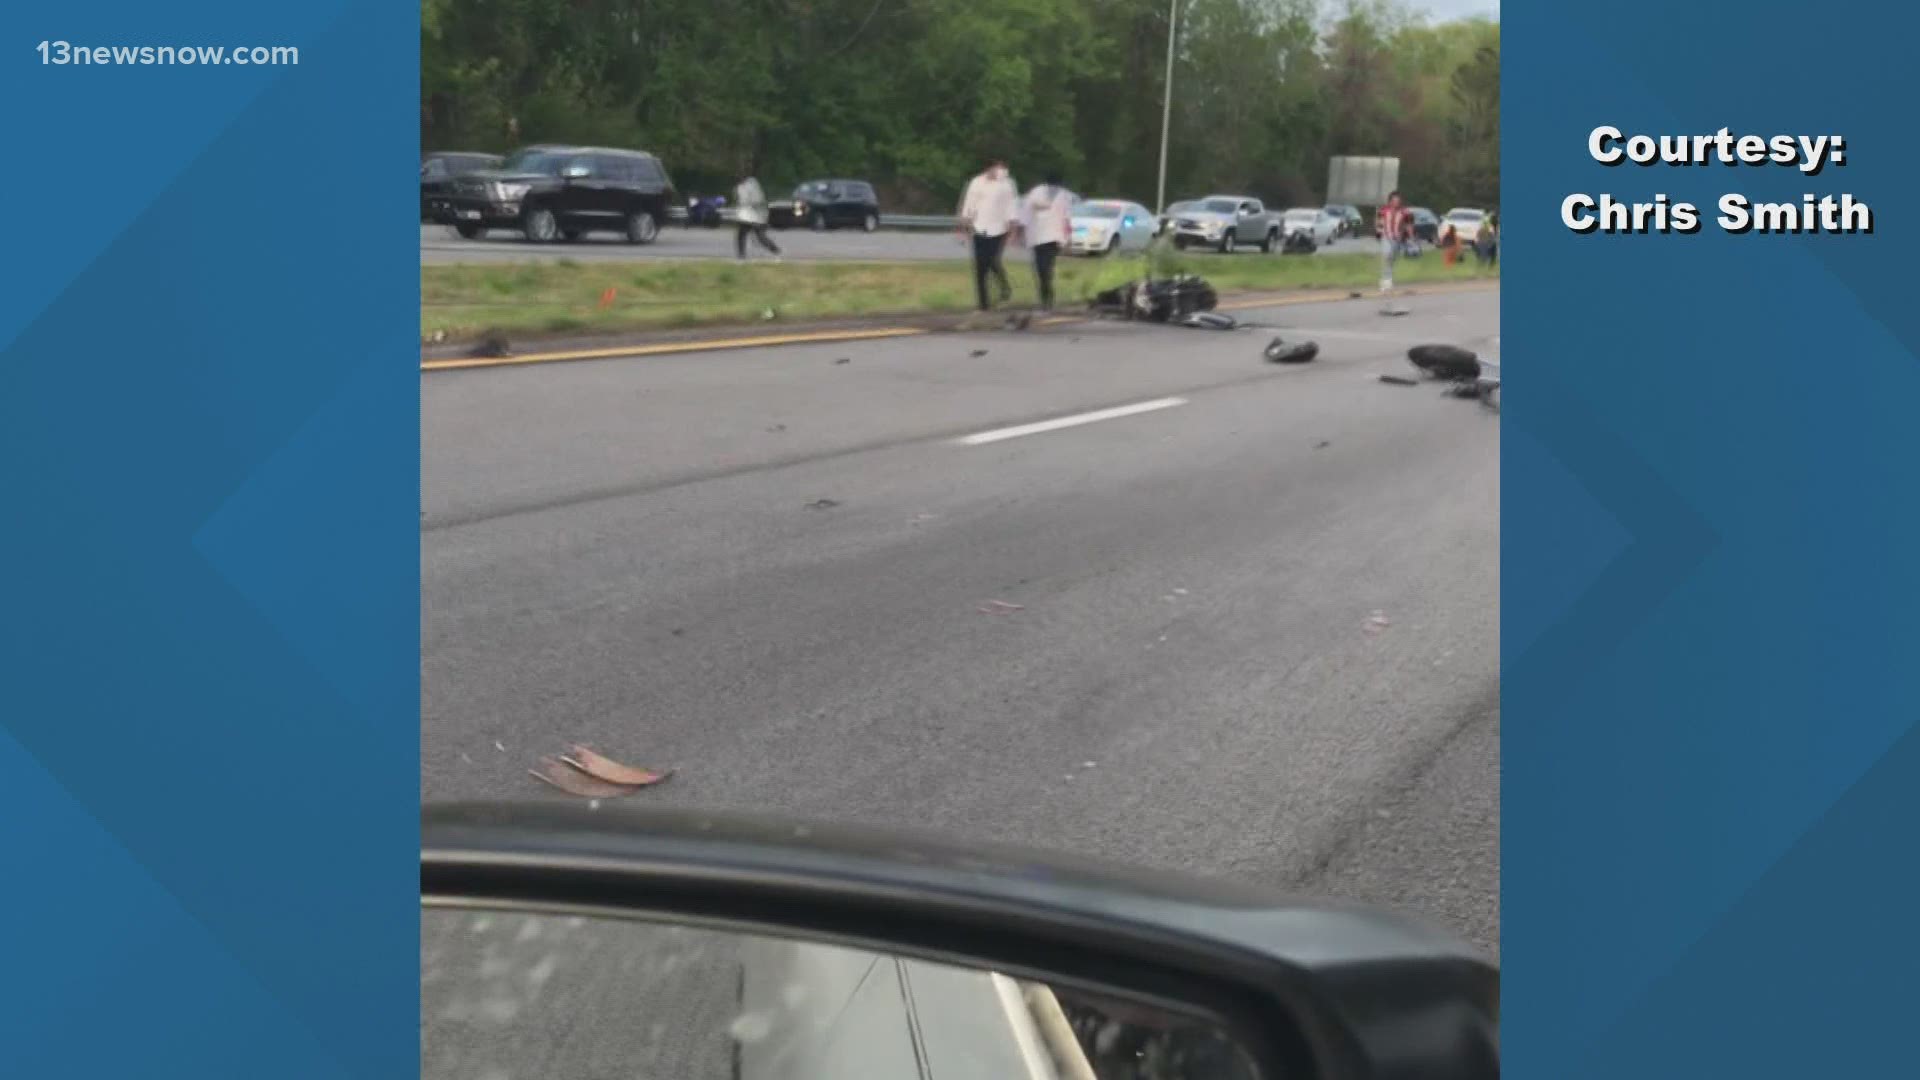 Virginia State Police said eight motorcycles were speeding on Interstate 264, weaving in and out of traffic when a crash occurred Saturday evening.